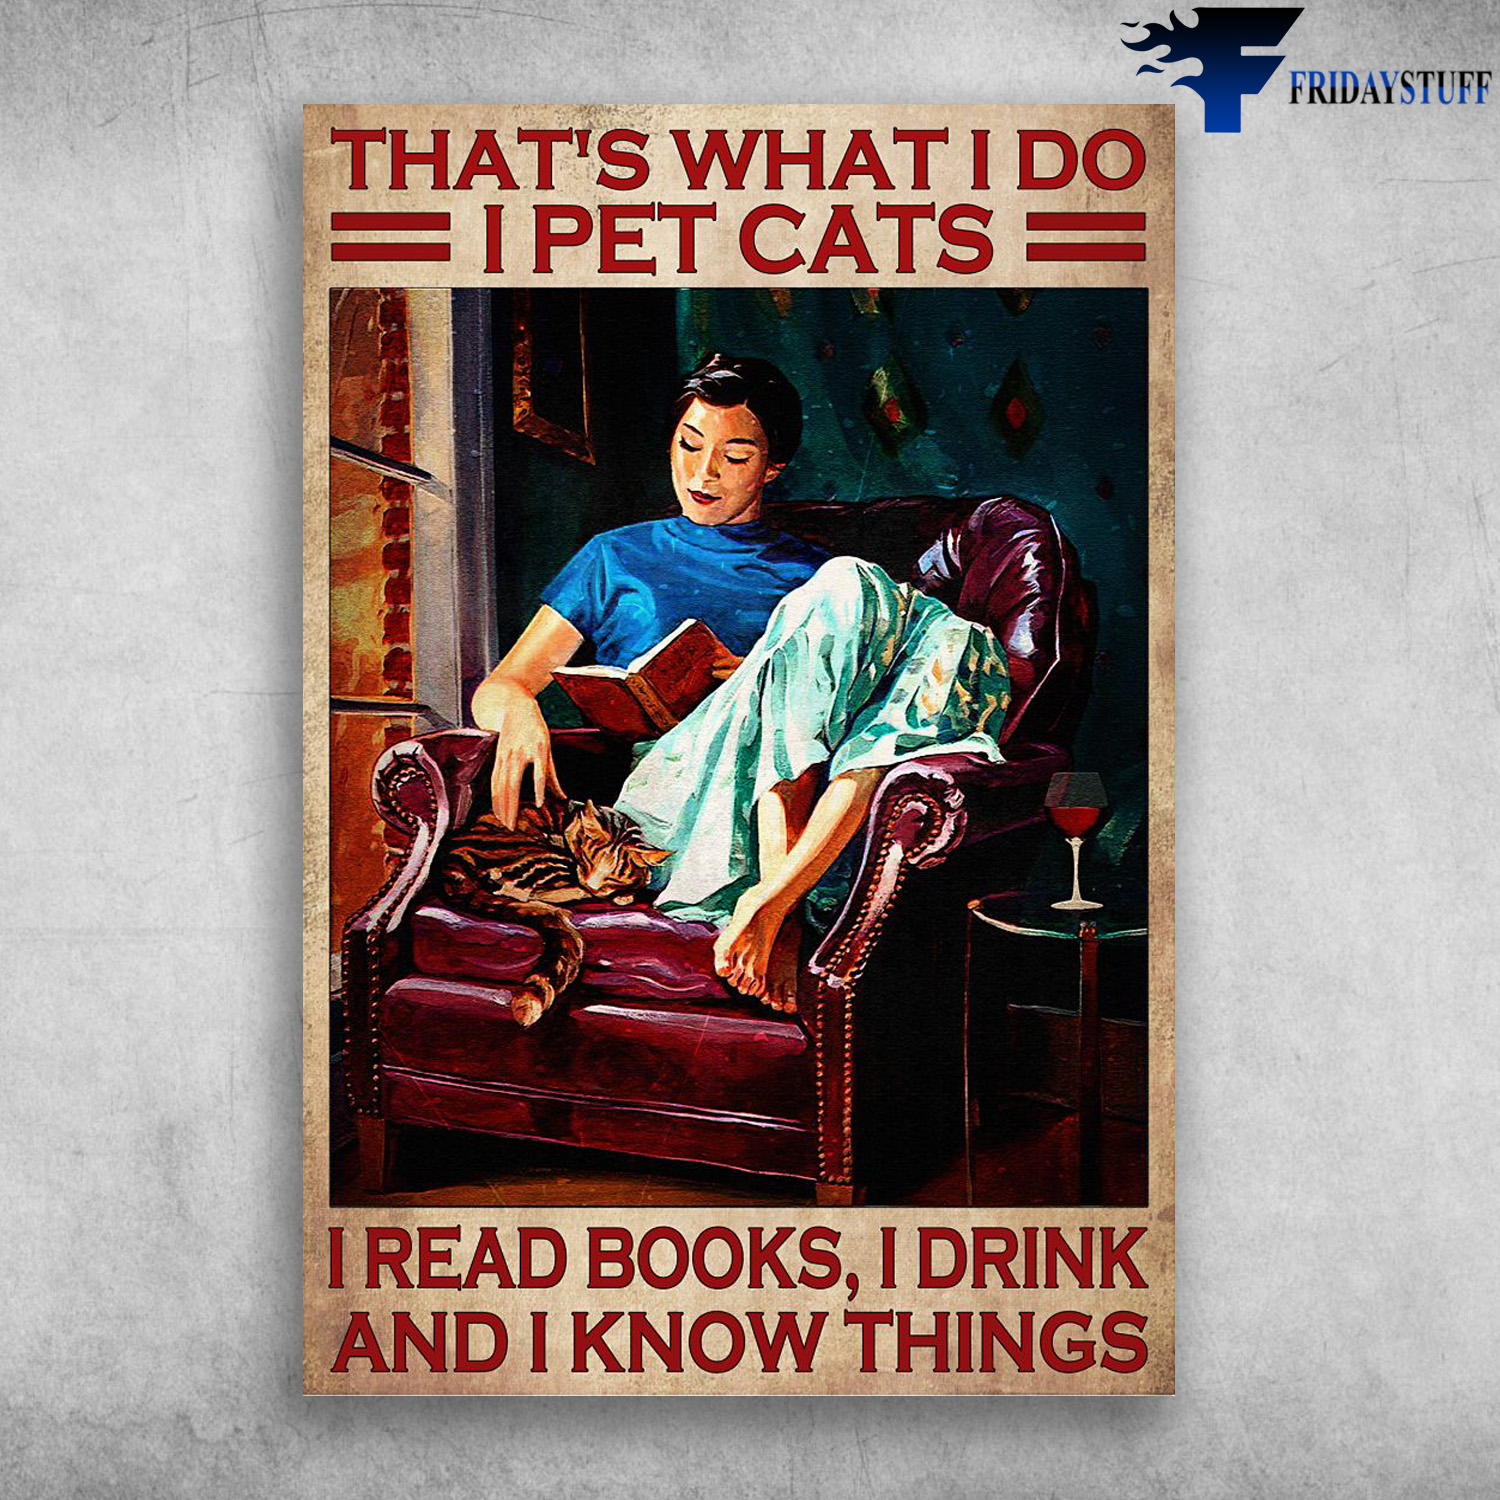 Girl Reading Book With Cat - That's What I Do, I Pet Cats, I Read Books, I Drink, And I Know Things